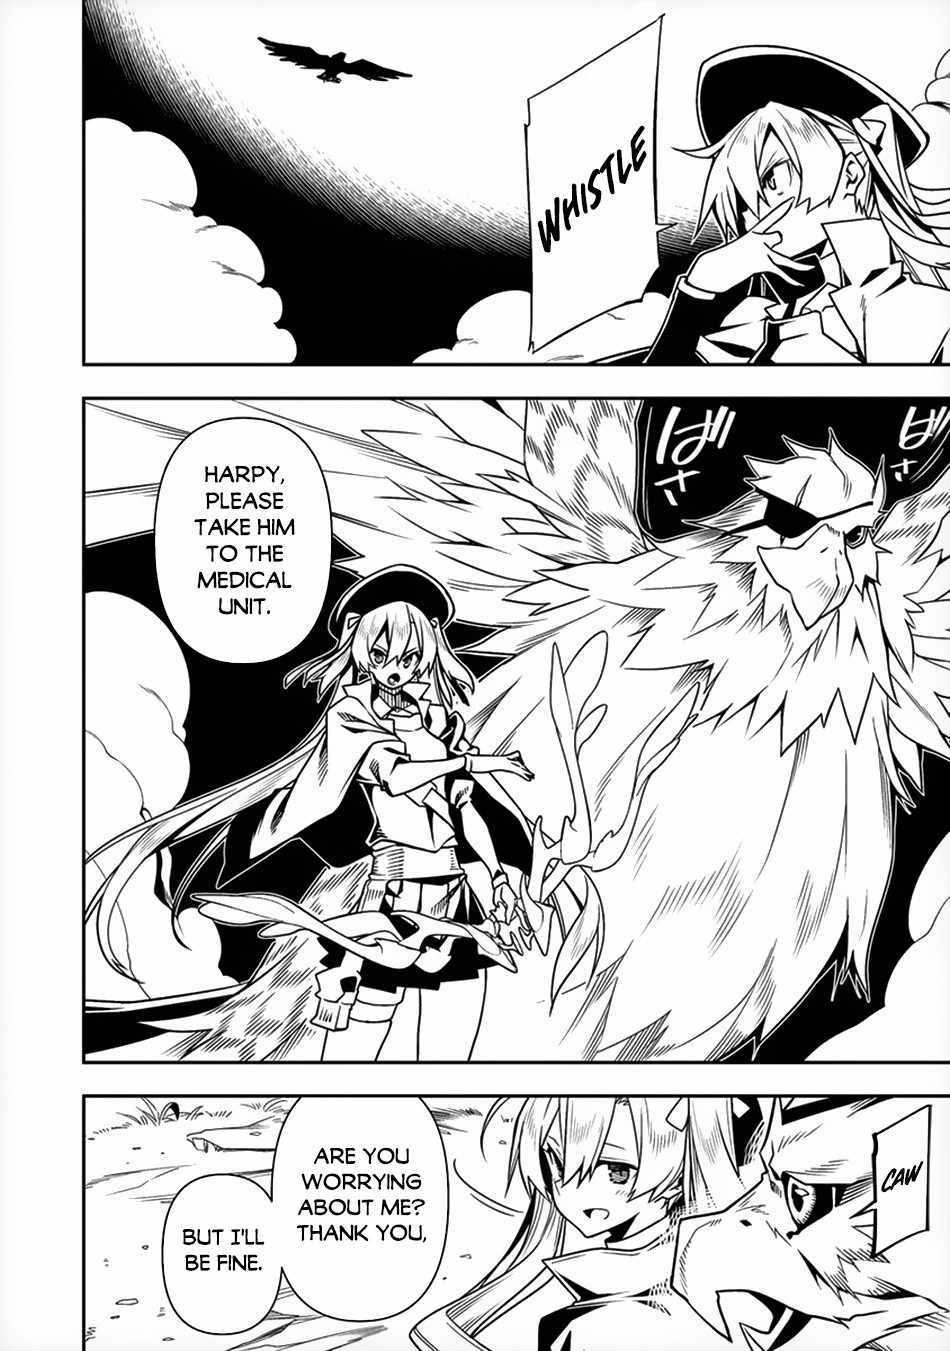 The Betrayed Hero Who Was Reincarnated As The Strongest Demon Lord - 8 page 7-7a284969